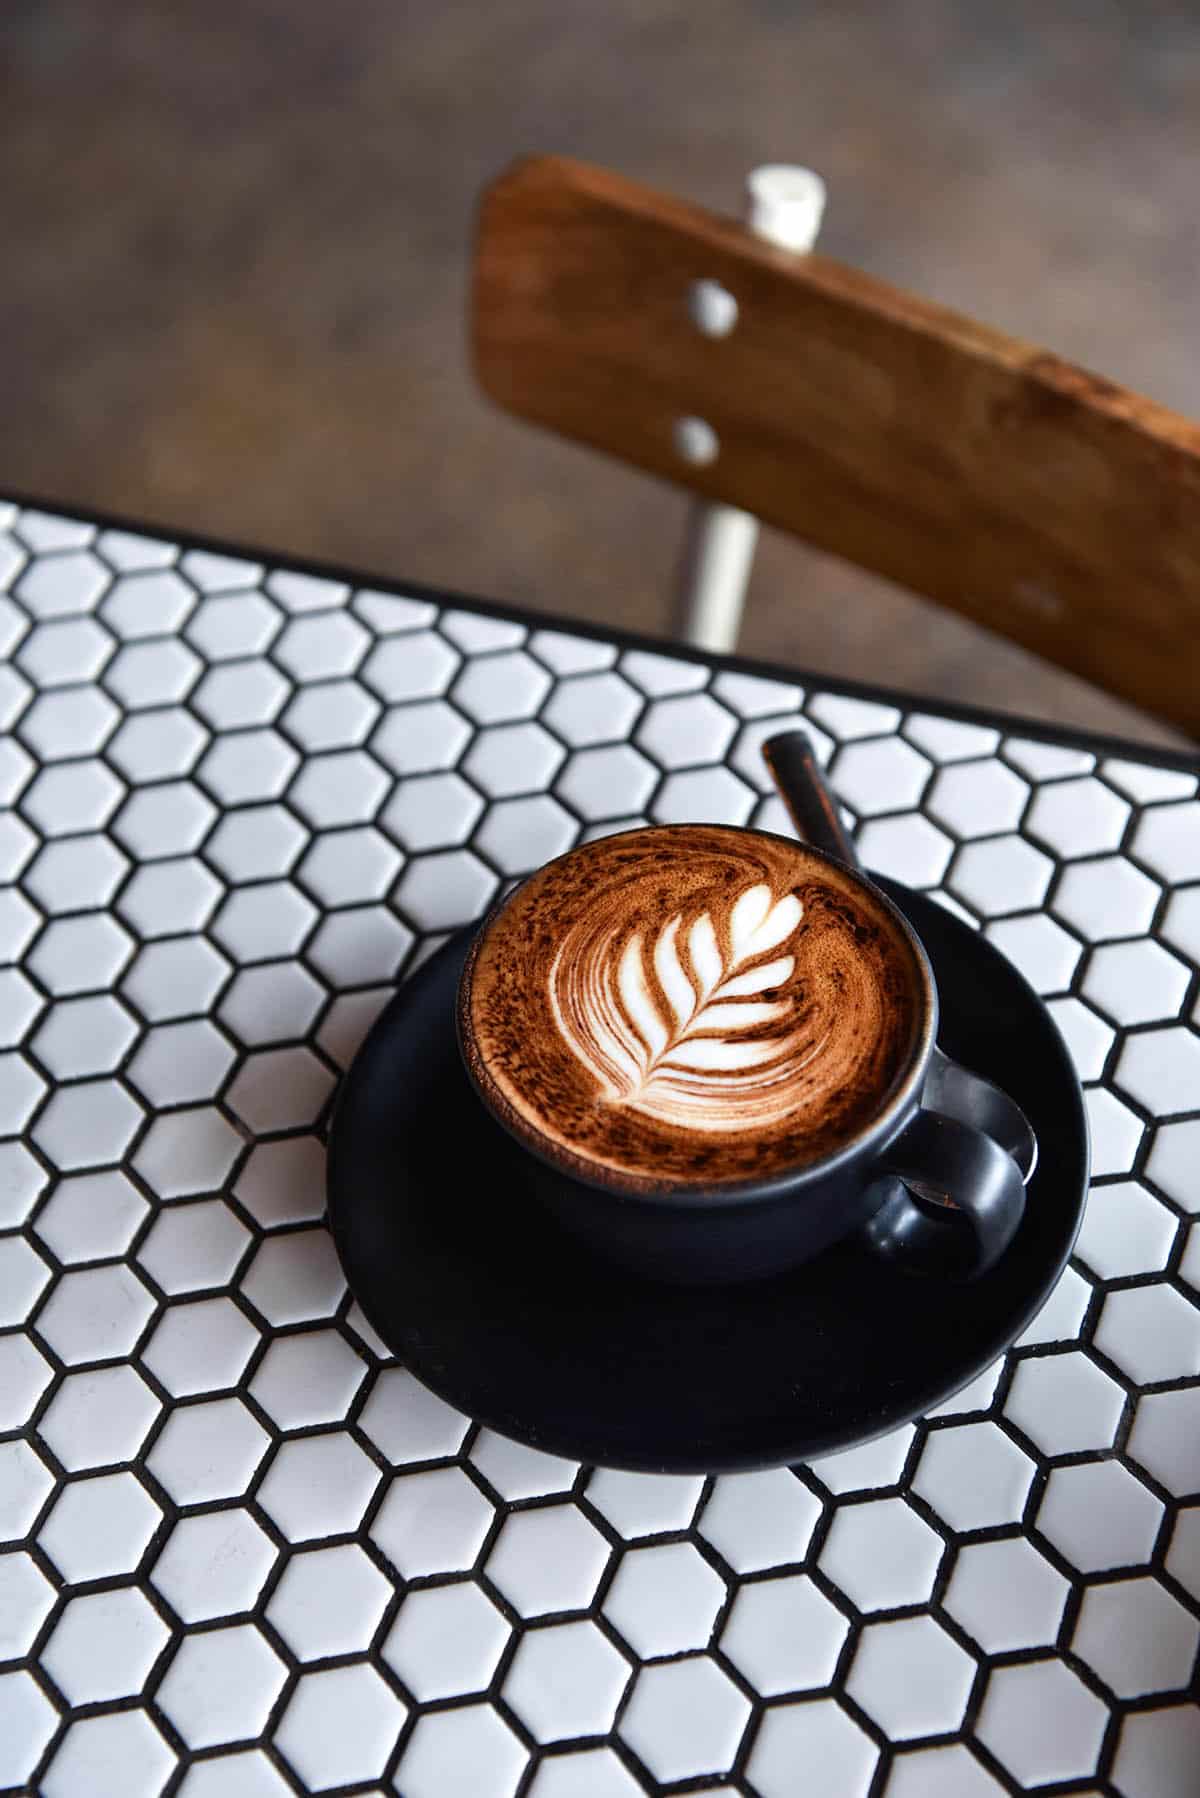 A side on image of cappuccino in a black matte cup and saucer on a white hexagonal tiled table